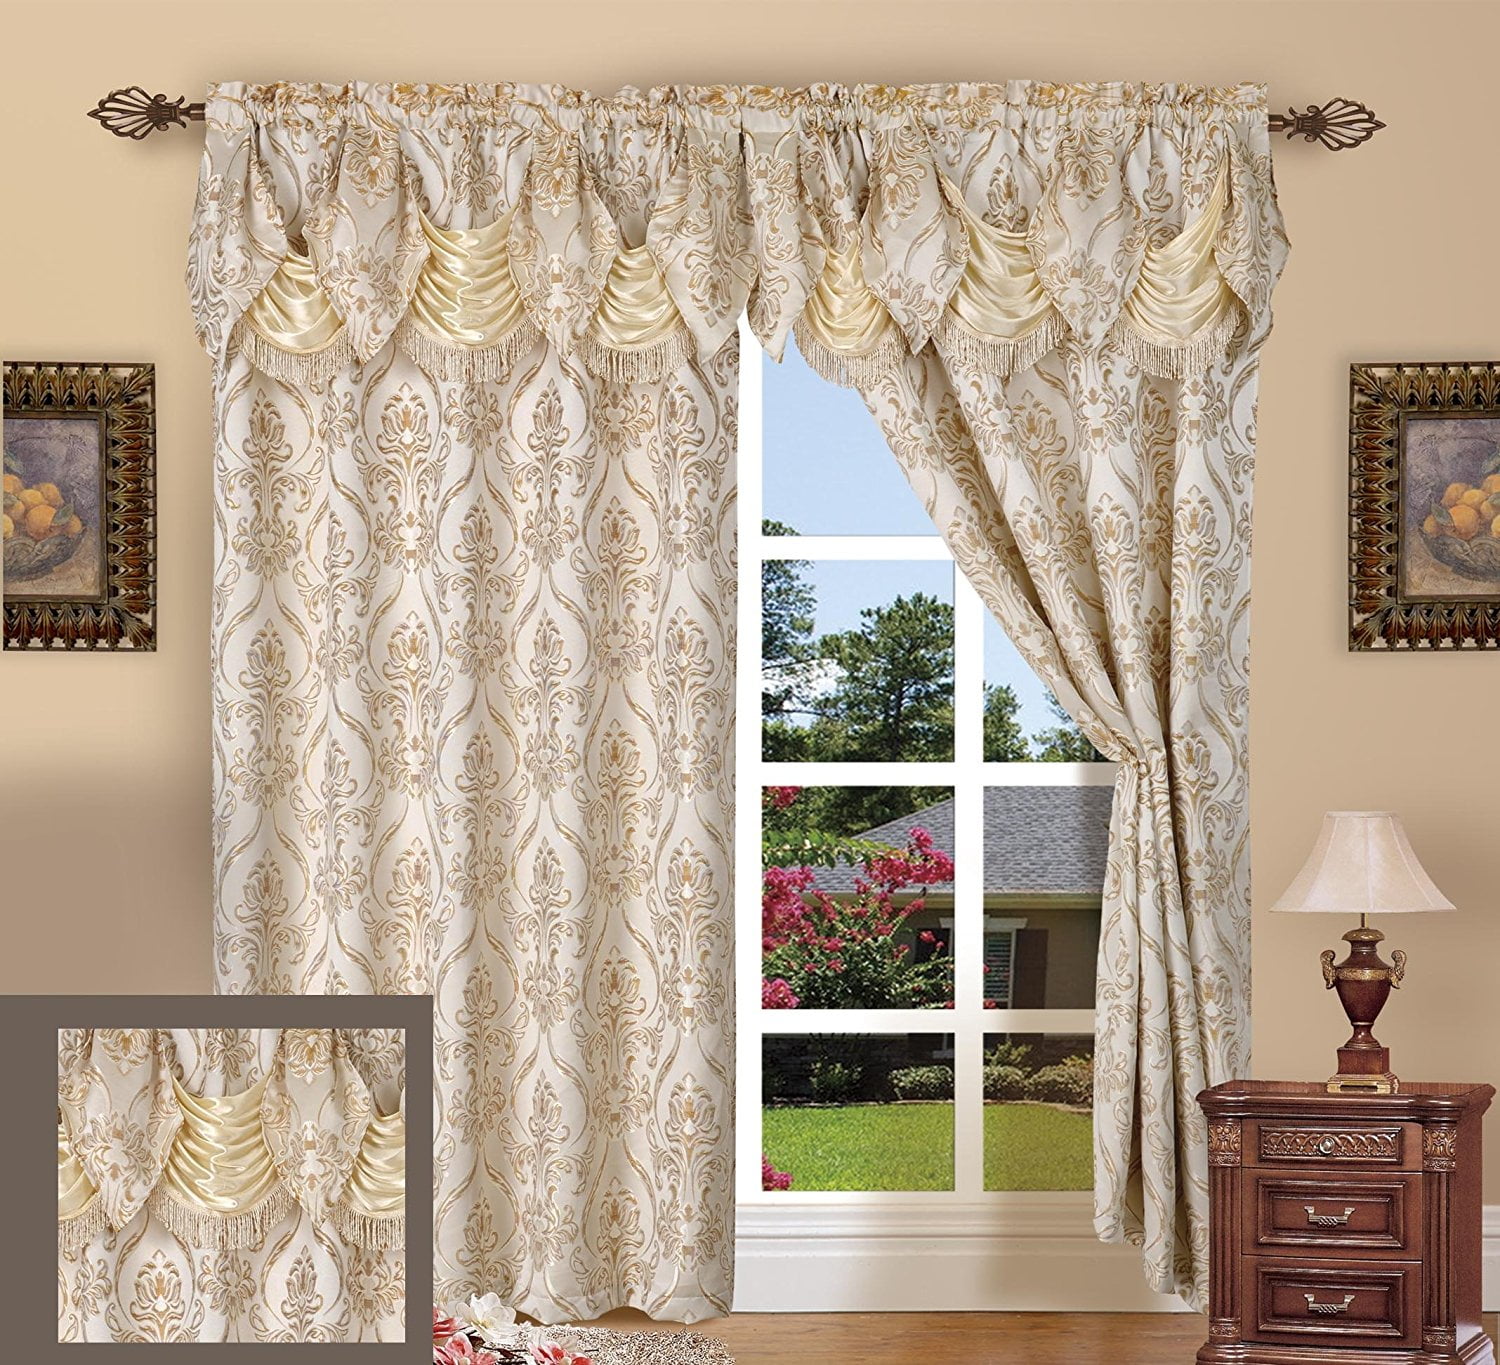 Dining Room Bedroom Burgundy and Sliding Doors Briana Elegant Home Window Curtain Drapes All-in-One Set with Valance & Sheer Backing & Tassels for Living Room